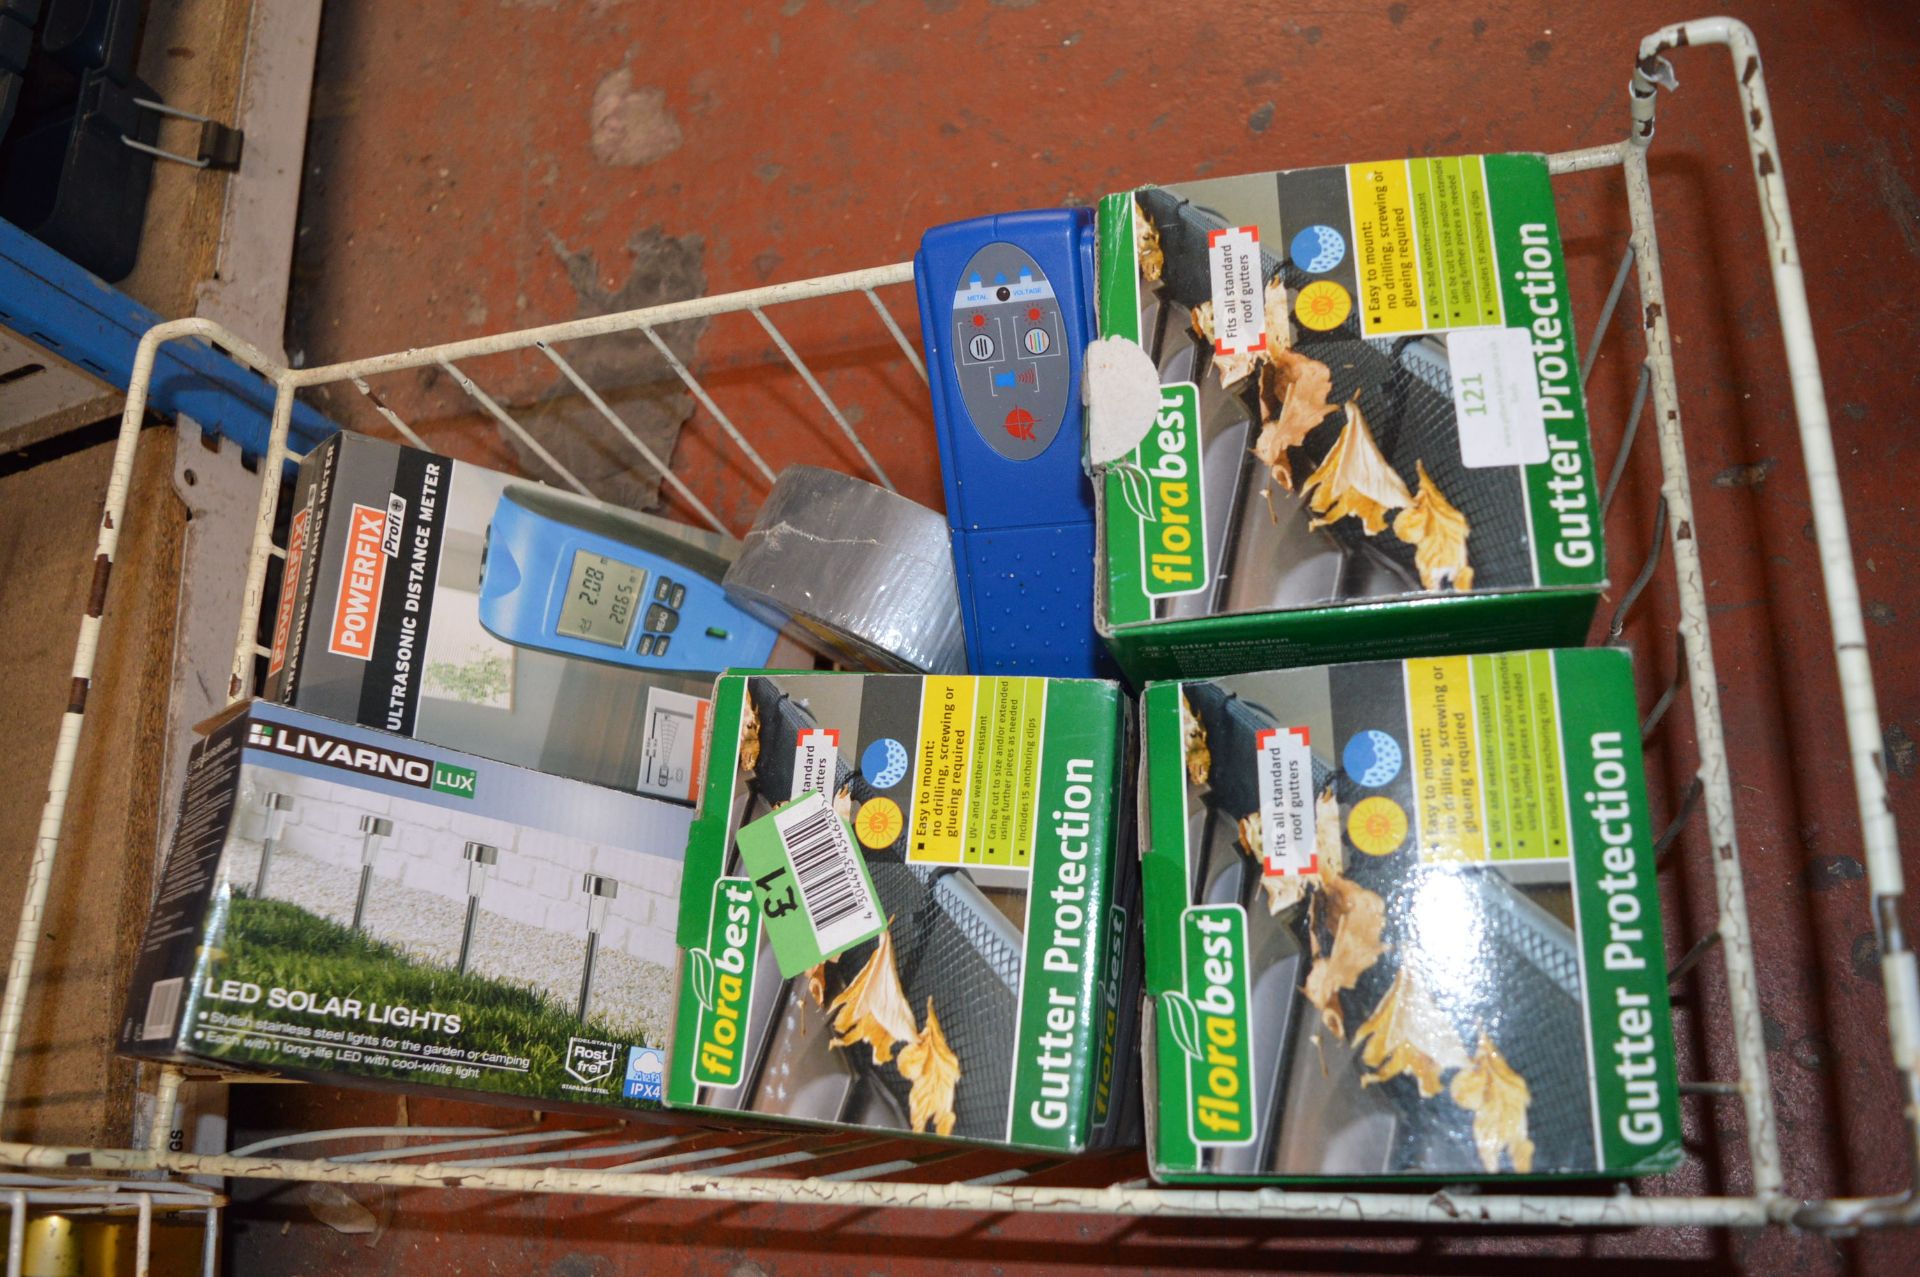 Quantity of Flora Best Gutter Protection, Ultra So